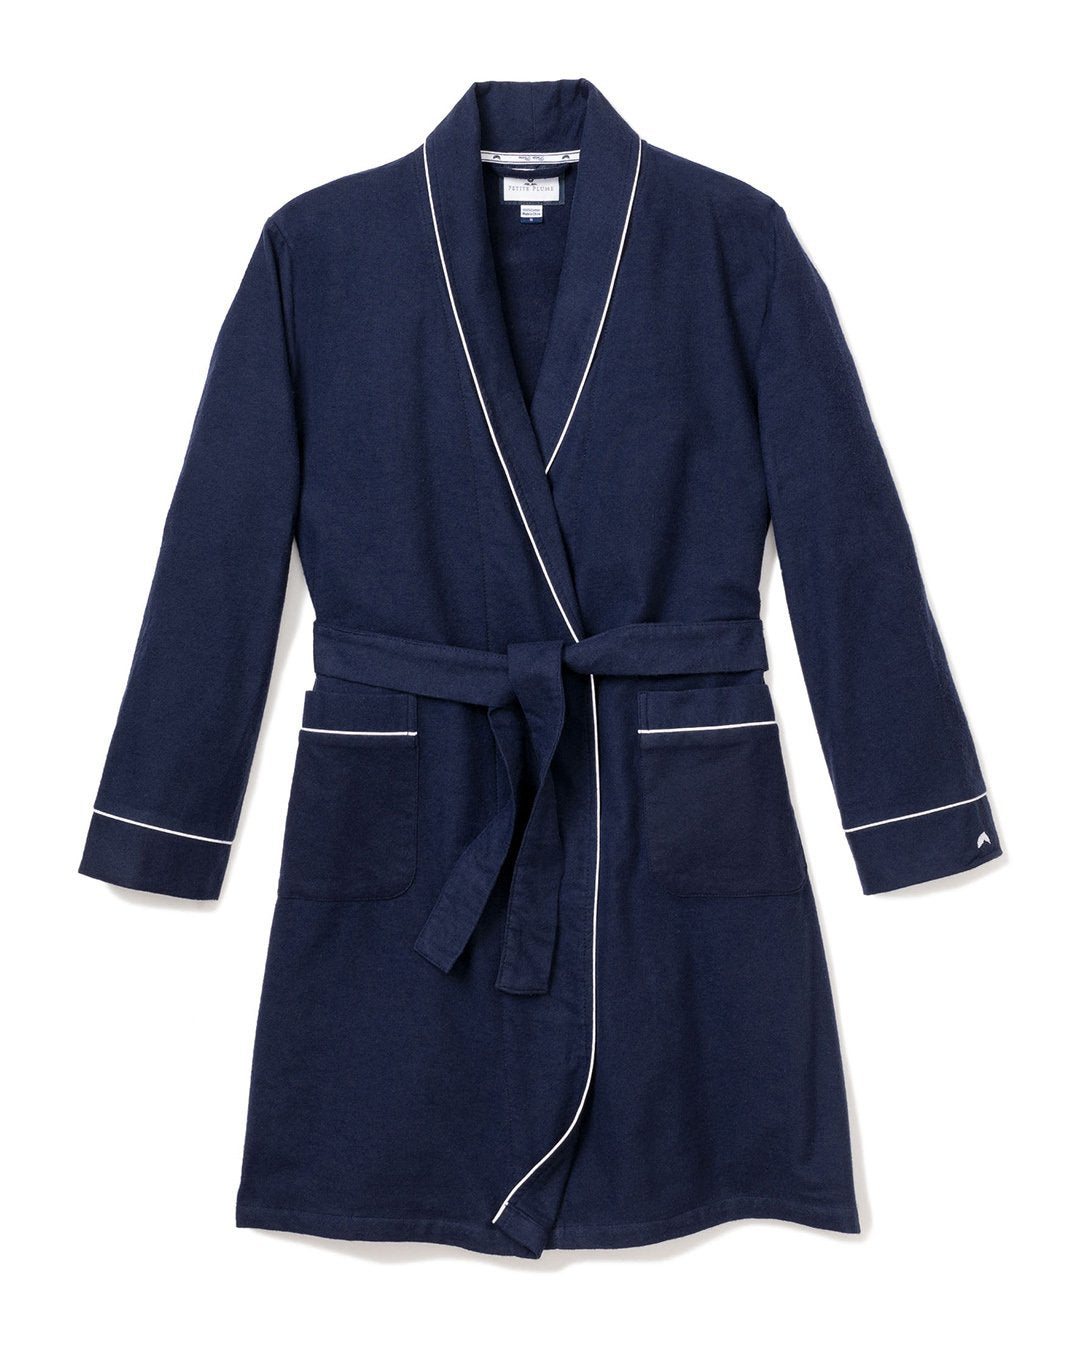 Navy Flannel Robe with White Piping - Petite Plume